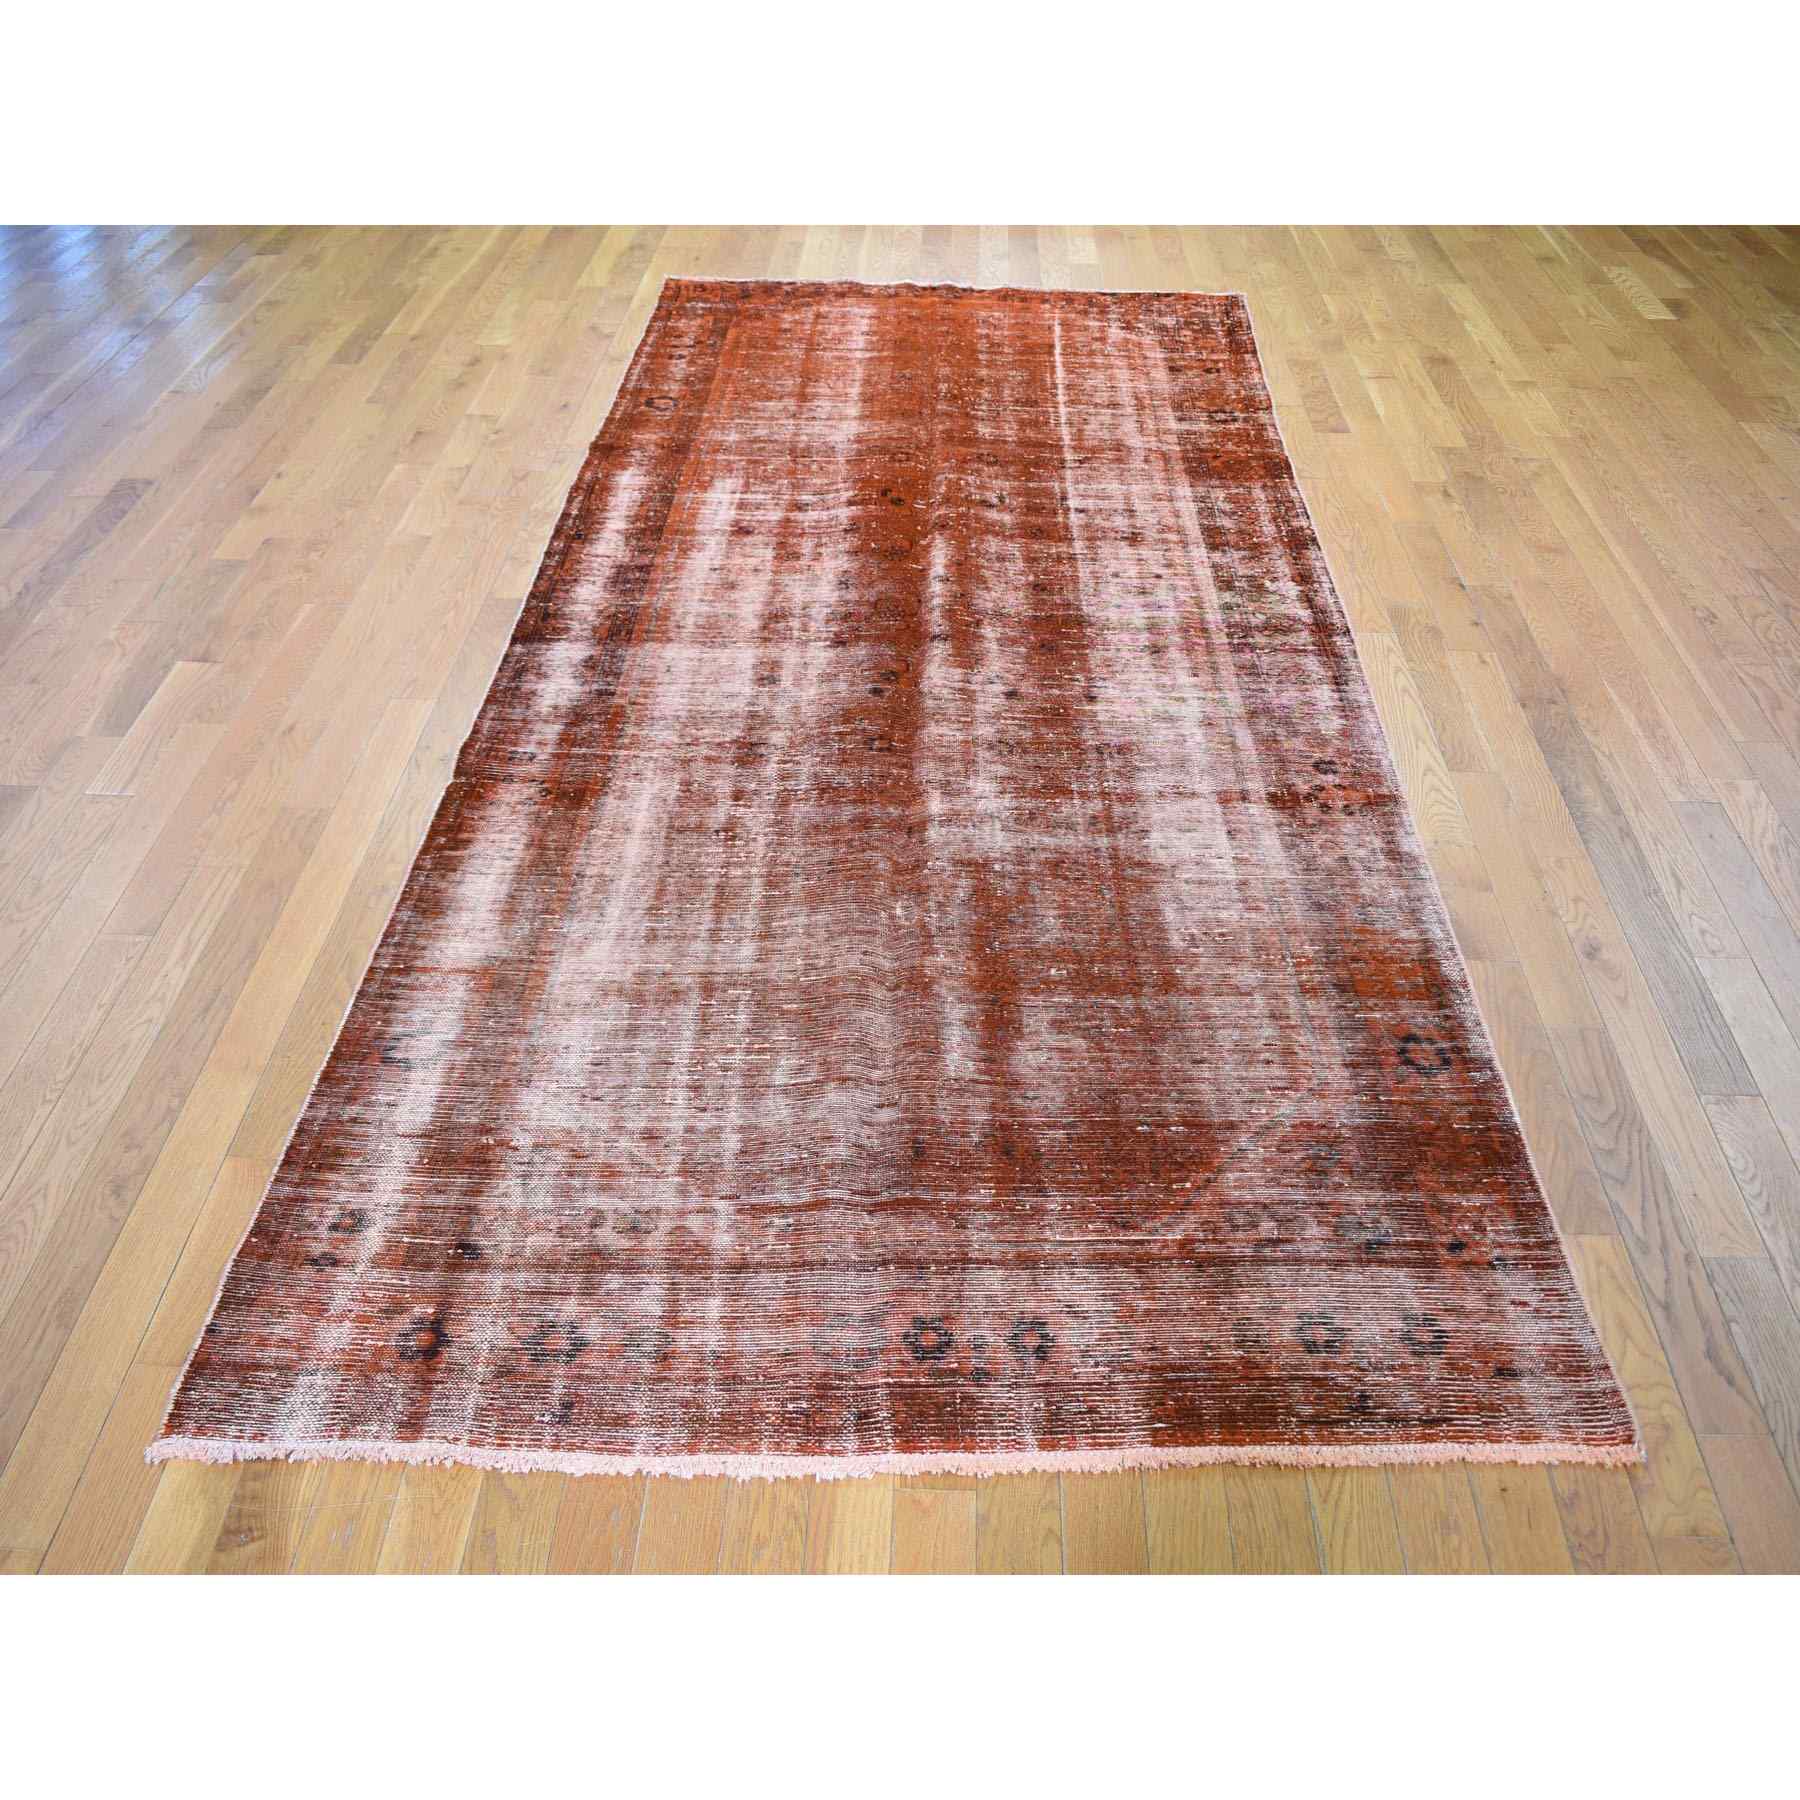 Overdyed-Vintage-Hand-Knotted-Rug-296070